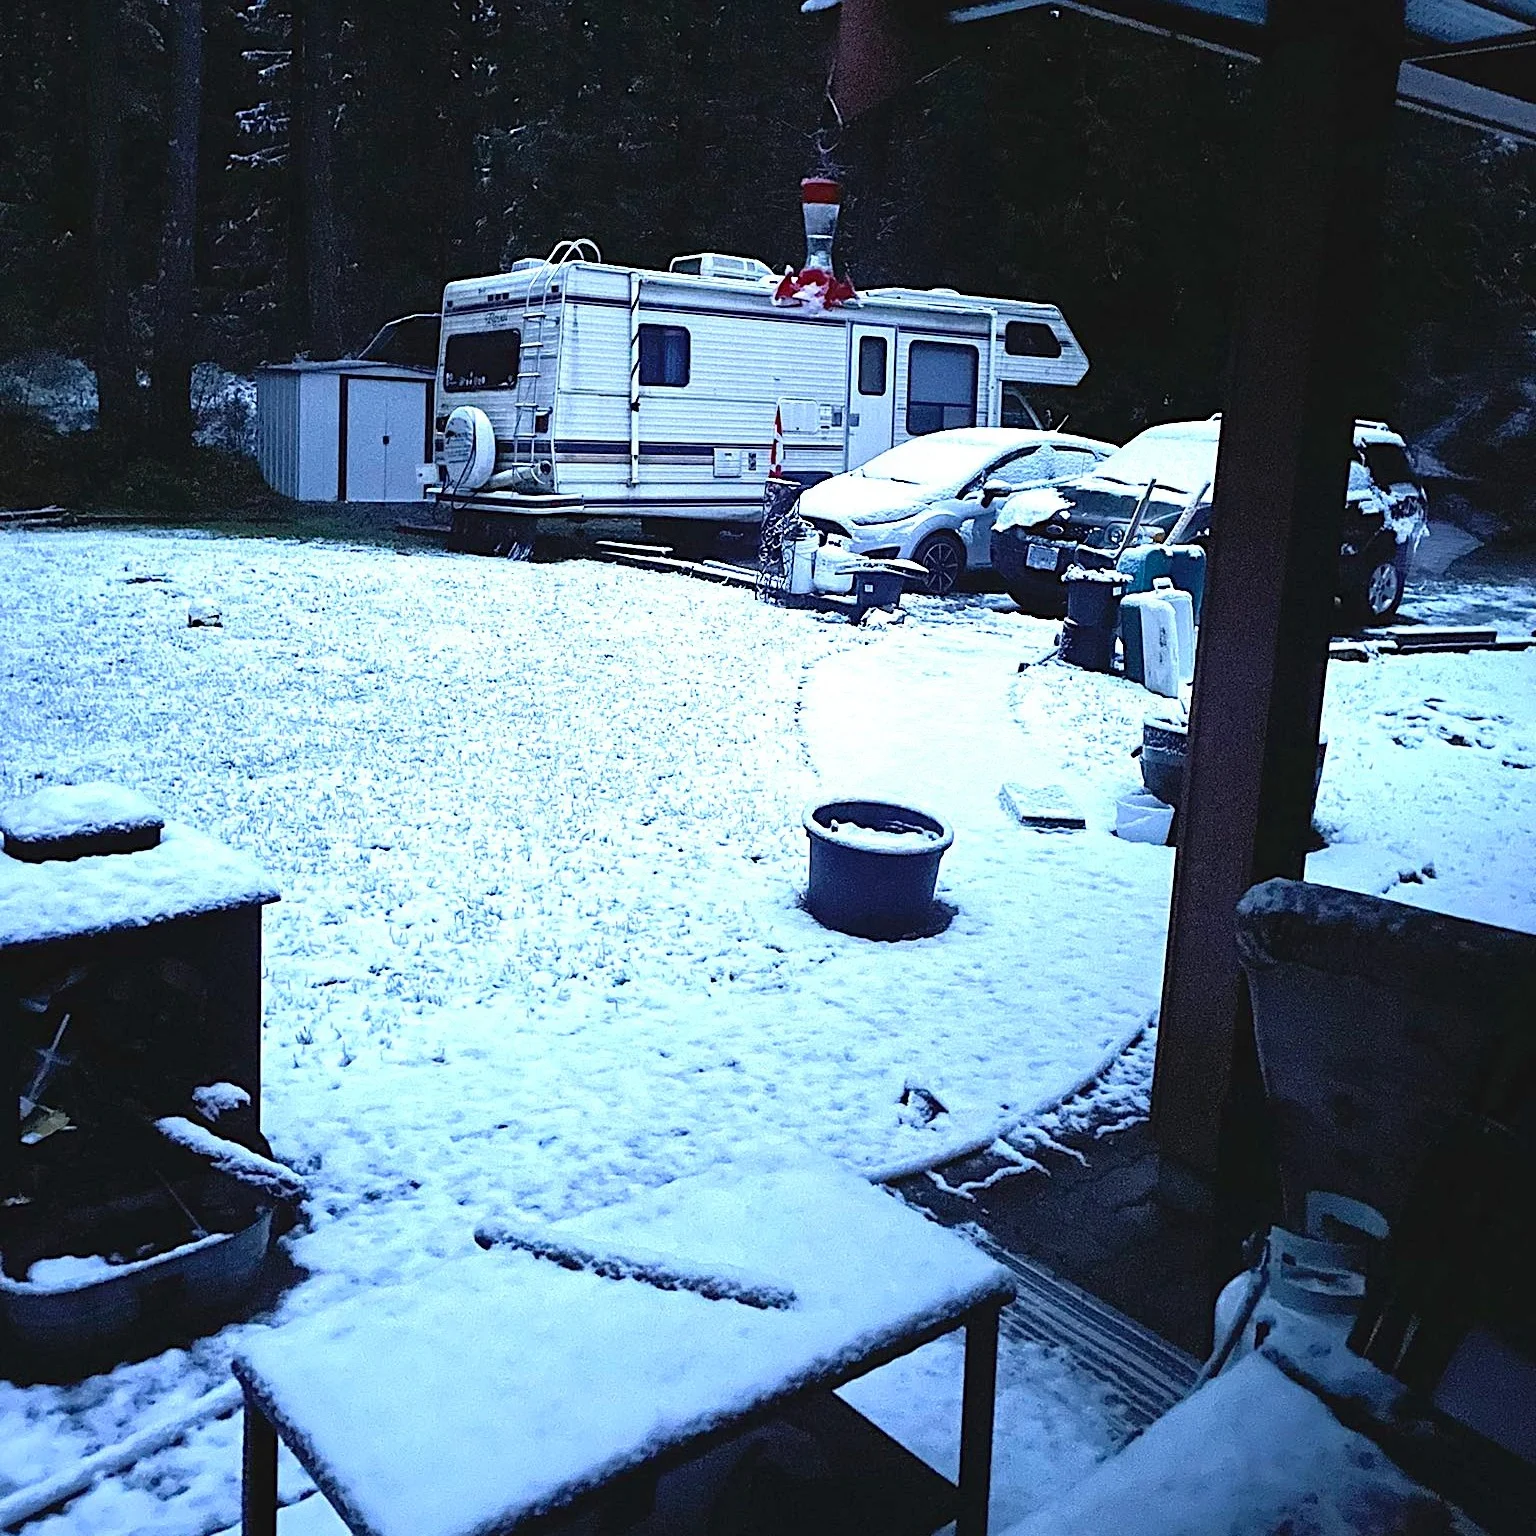 PHOTOS: Unusual April snow is spring wake-up call for B.C. residents